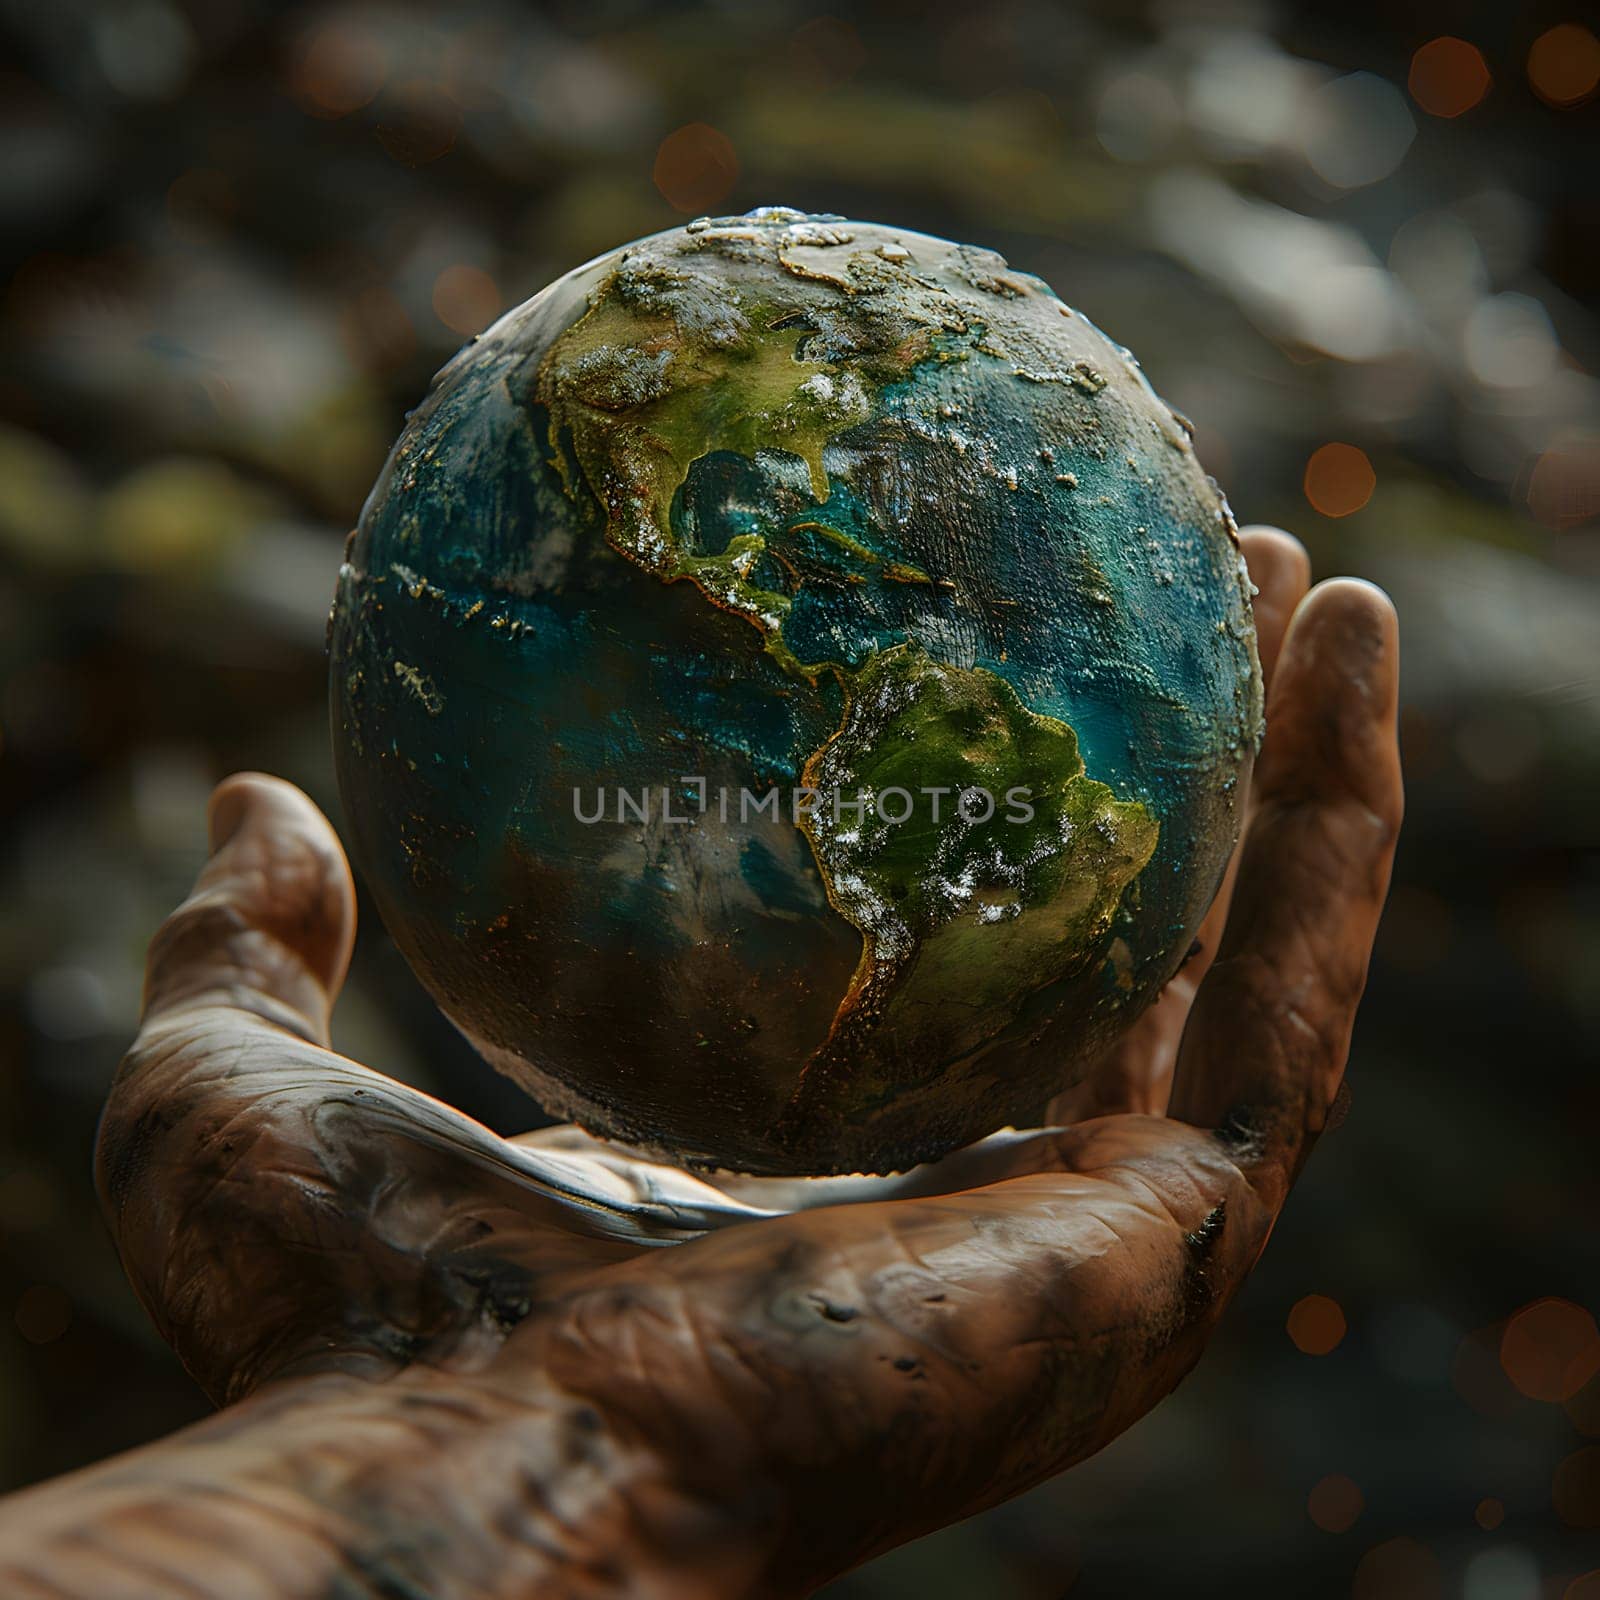 The person is holding a dirty globe made of natural materials like wood and glass, resembling a sculpture. The globe is a fashion accessory with an electric blue color, perfect for macro photography